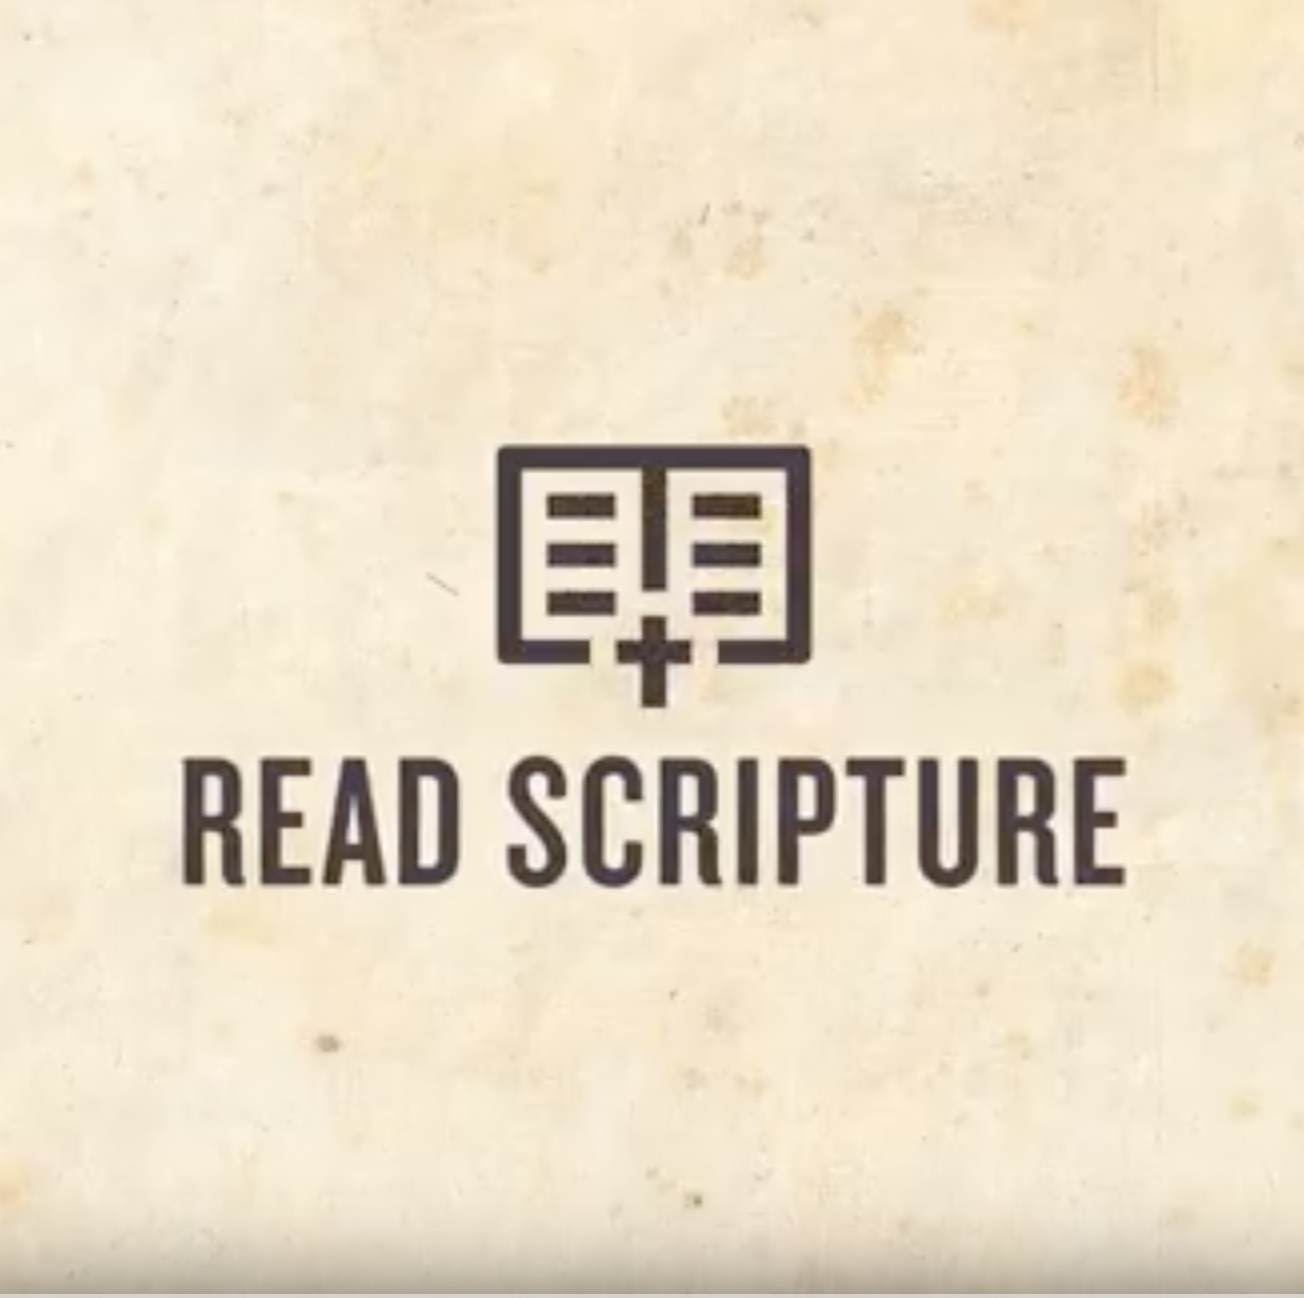 You are currently viewing Read Scripture—An Innovative Bible Reading Tool